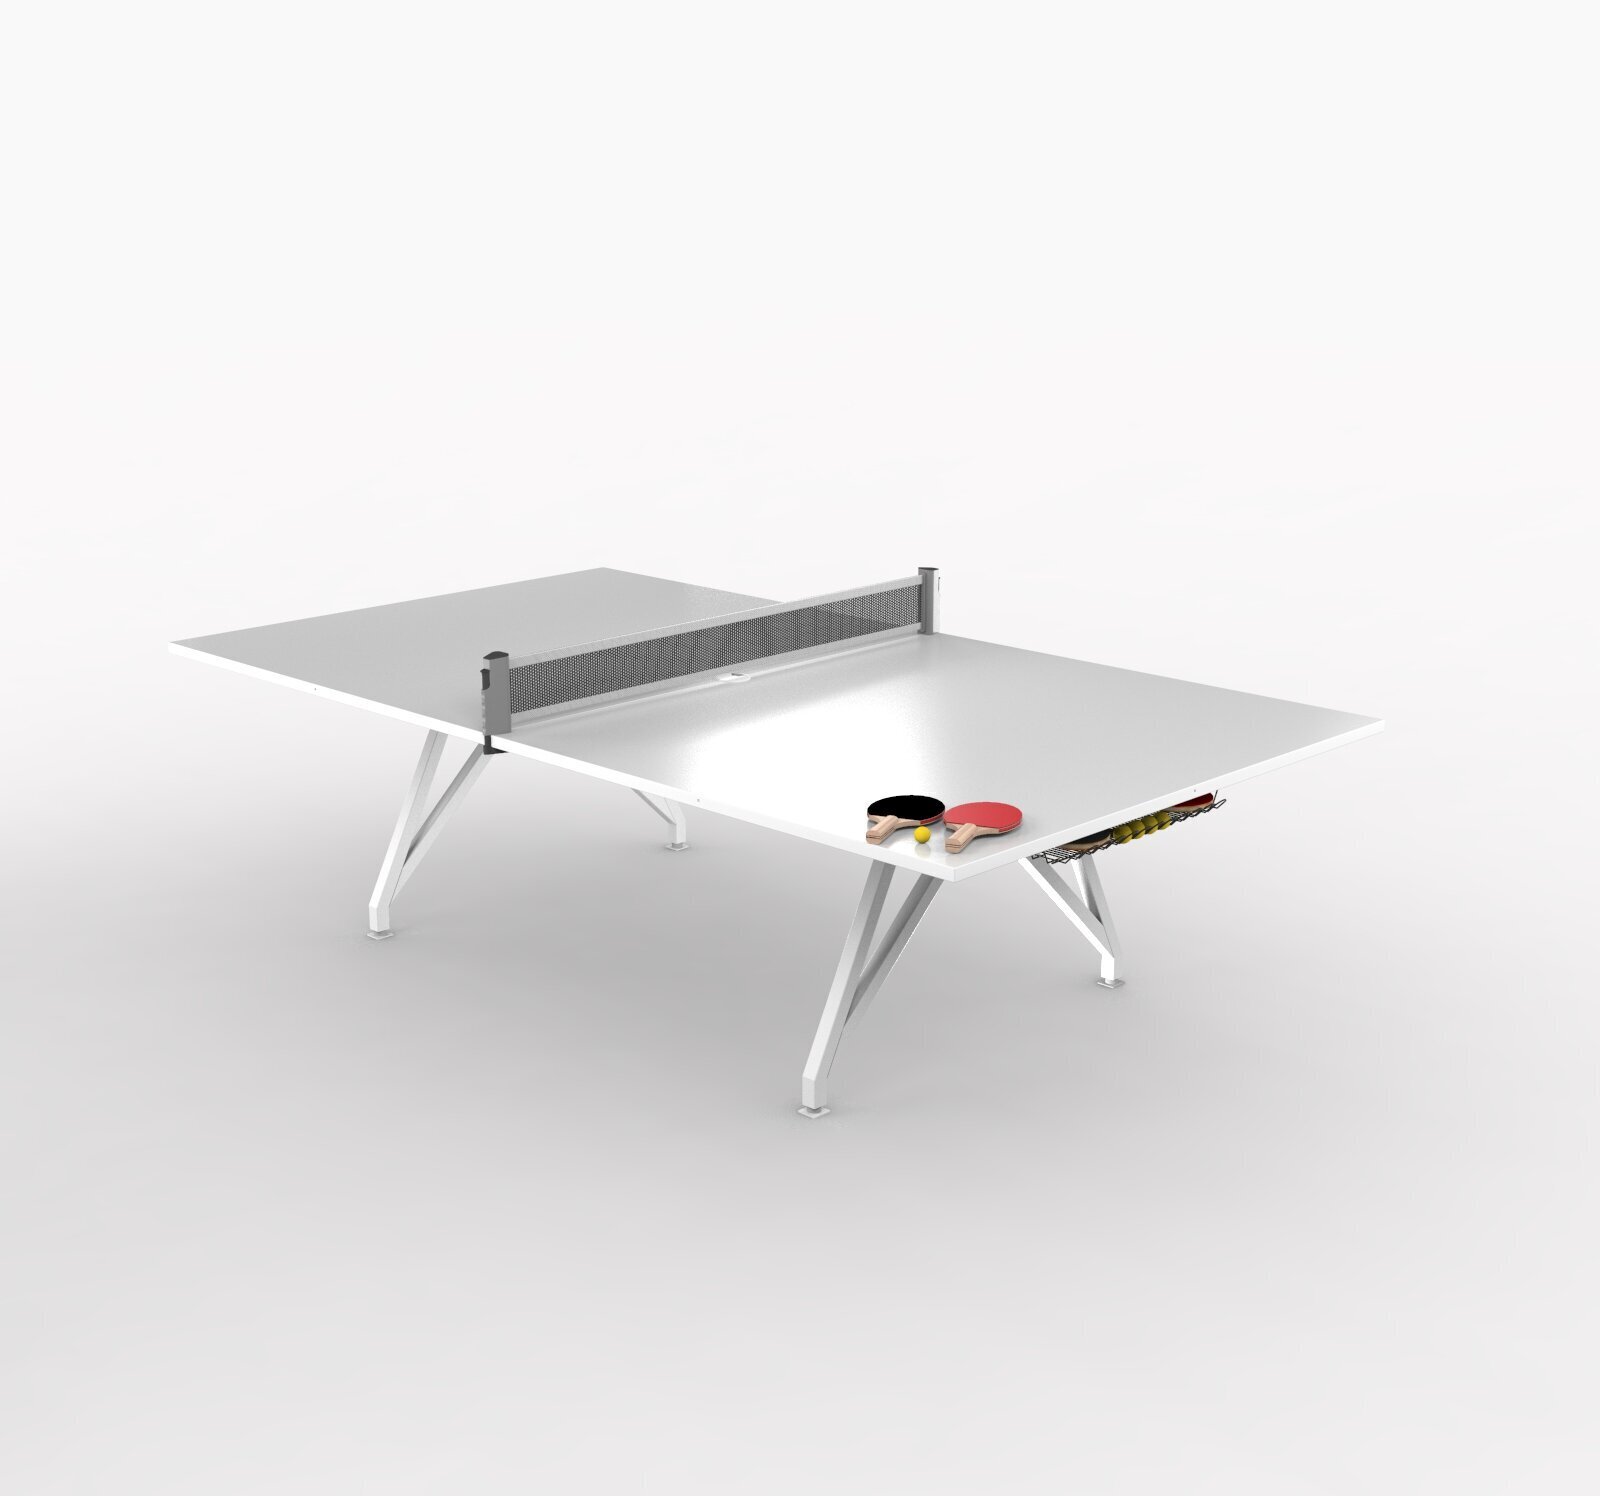 Streamlined Modern Ping Pong Table